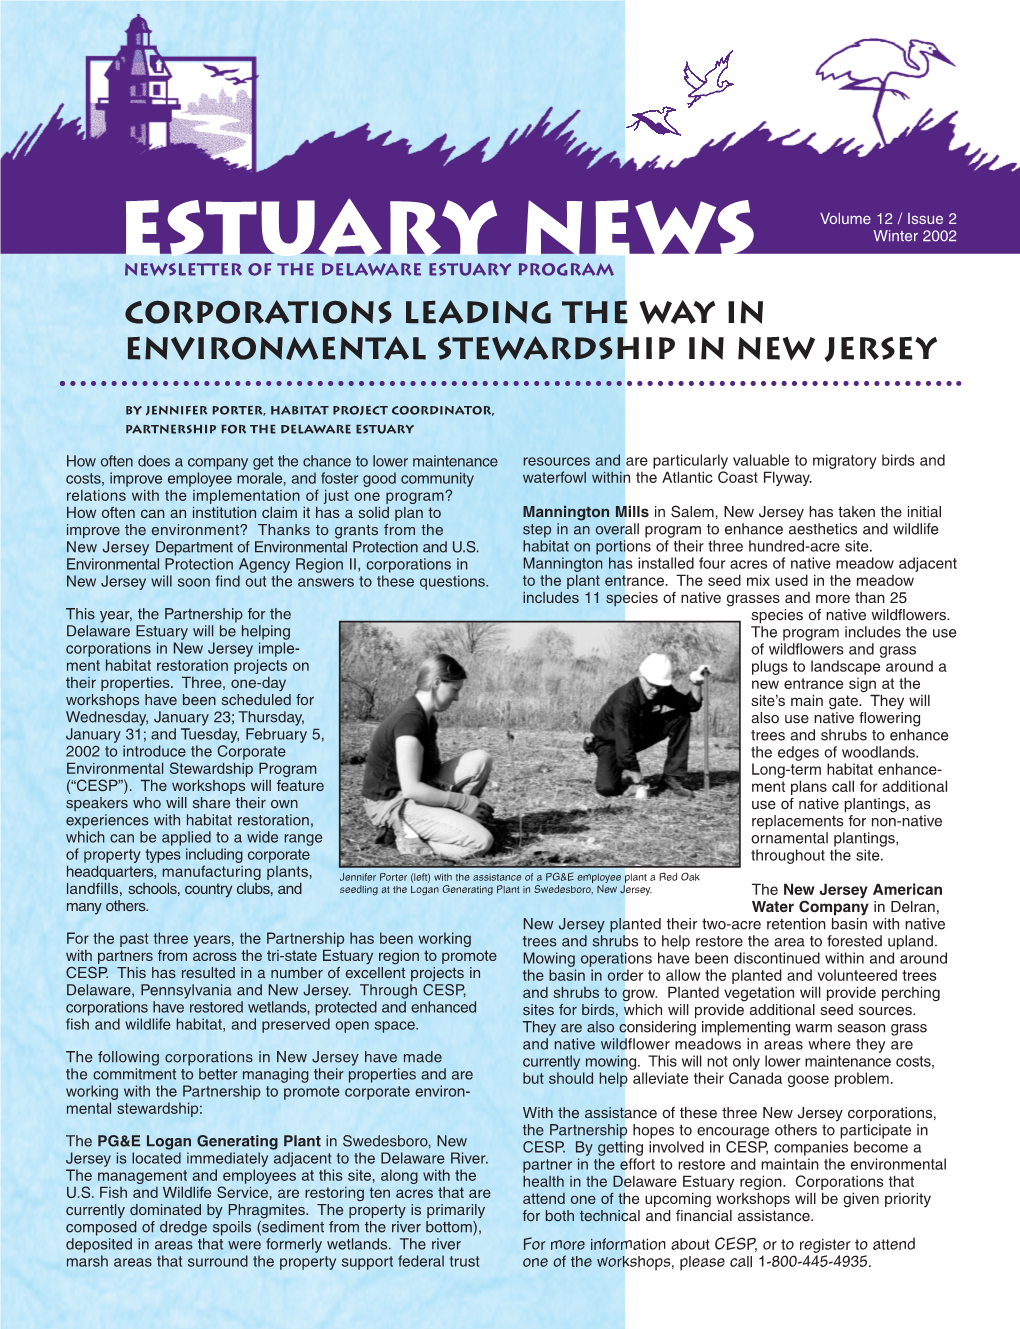 Winter 2002 Newsletter of the Delaware Estuary Program Corporations Leading the Way in Environmental Stewardship in New Jersey